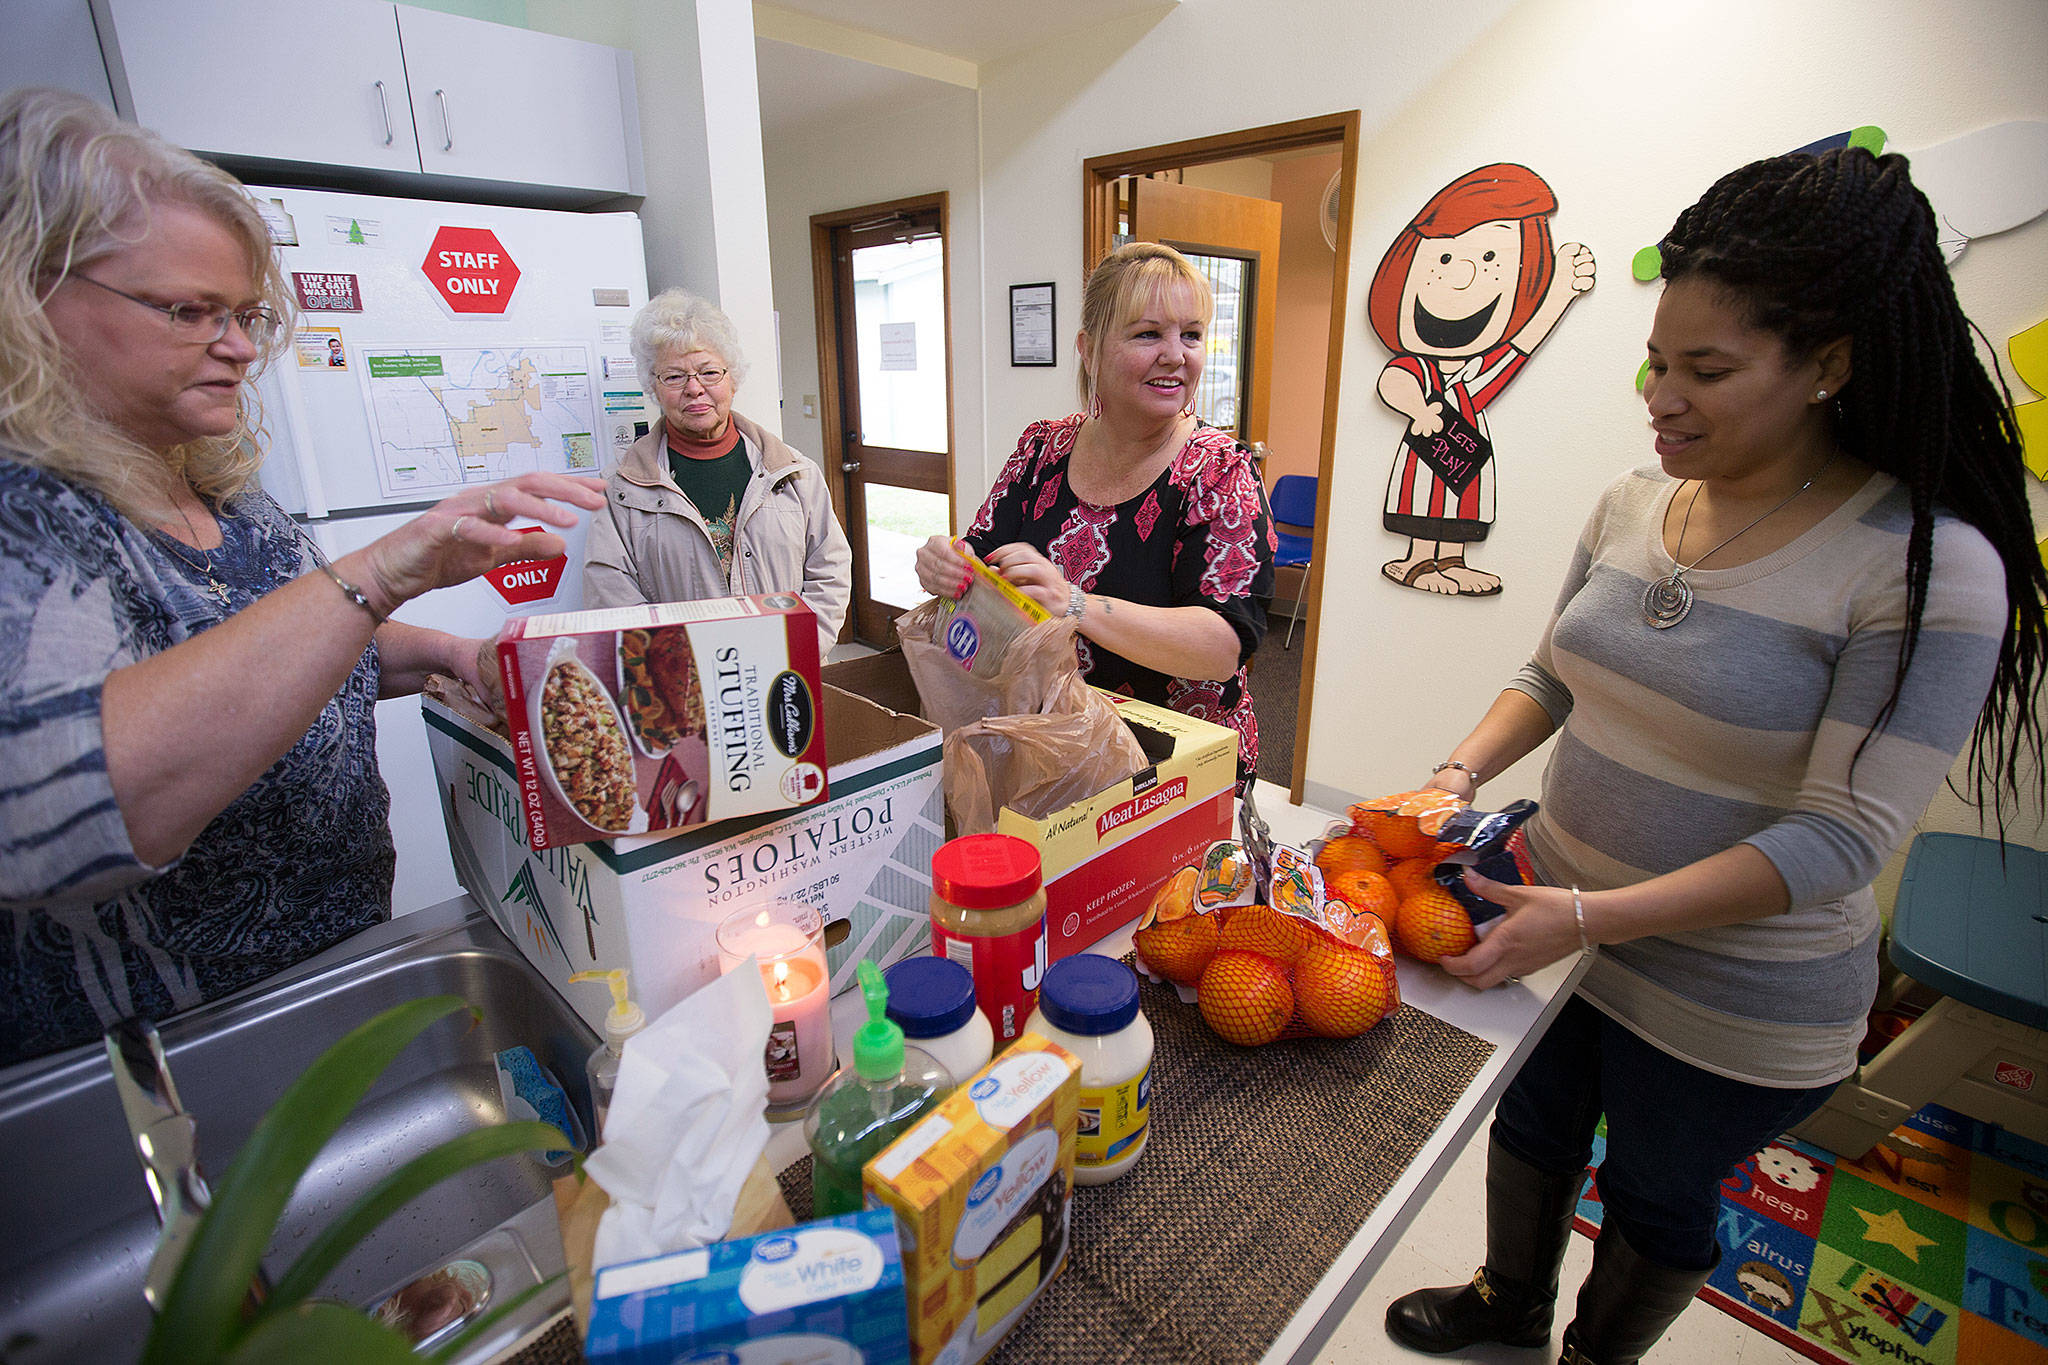 Peggy Ray (center), Tracey Nelson (left) and Doris Drohin (right) organize food brought in by Jeannie Lish (background) at the Arlington Community Resource Center on Nov. 20. Ray began the center in the aftermath of the Oso mudslide and now oversees six family centers in Snohomish County. (Andy Bronson / The Herald)